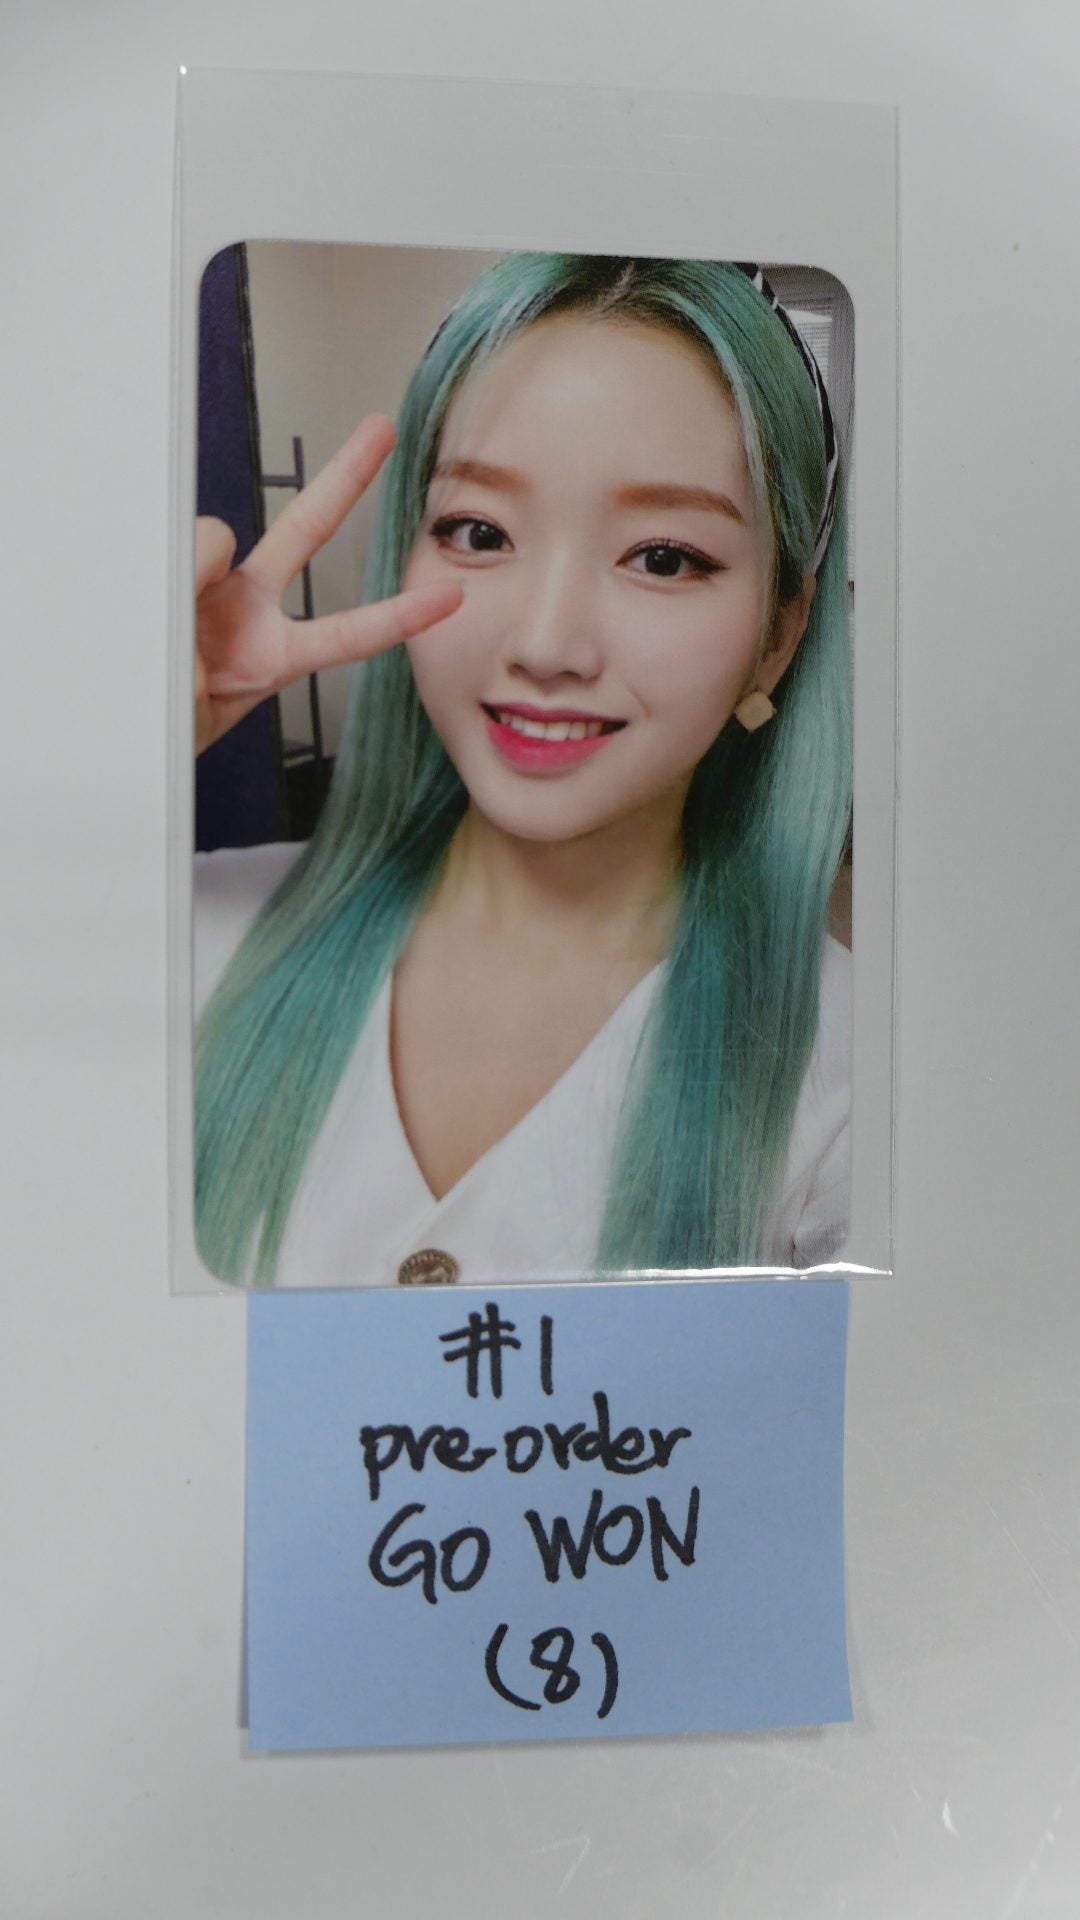 Loona 12:00 - Pre-order (MMT, WithD, Etc) benefit photocard - Chuu & Gowon